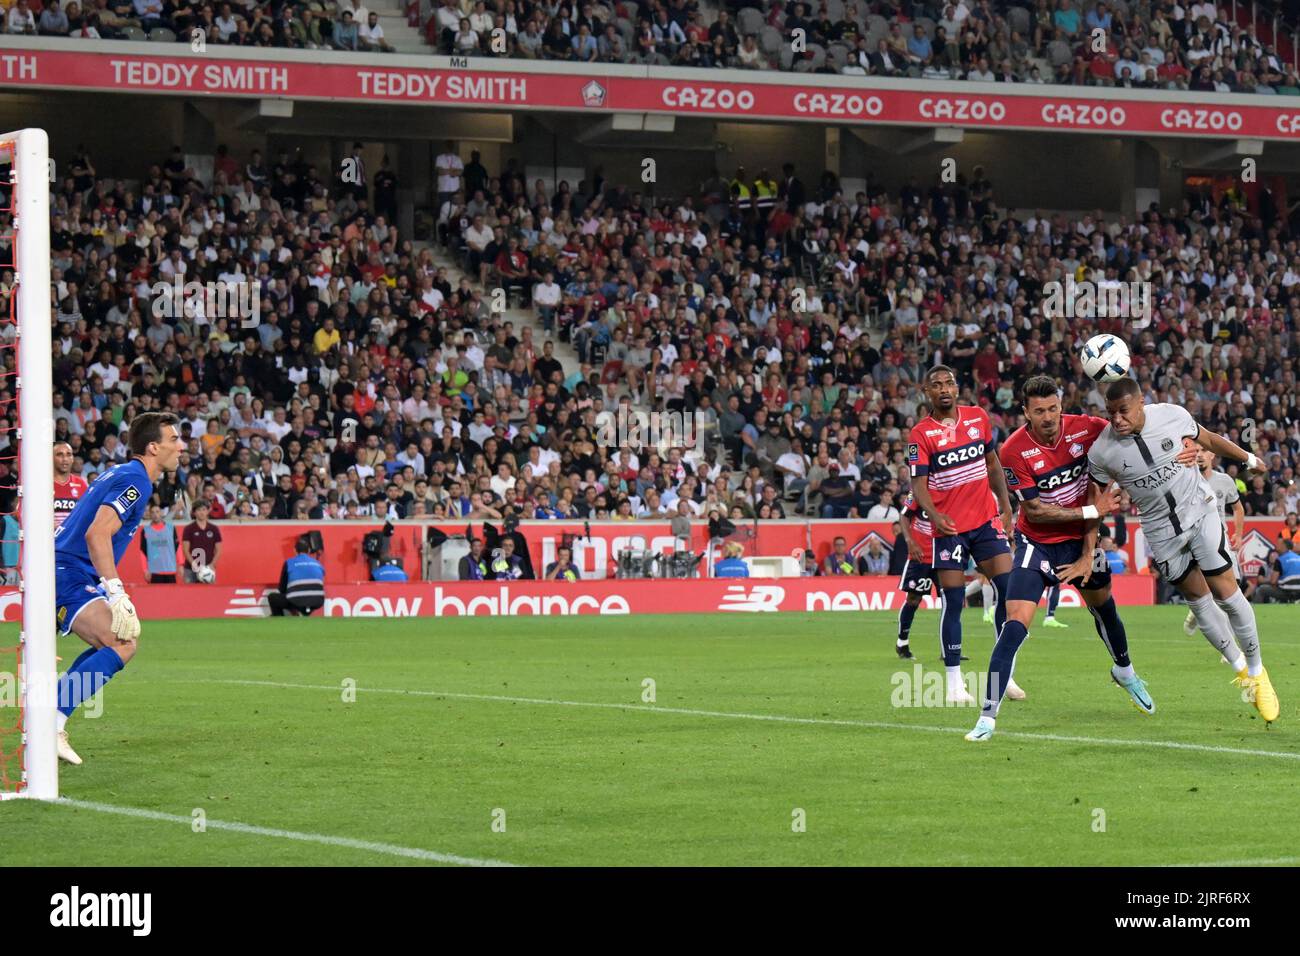 LILLE - (lr) LOSC Lille goalkeeper Leo Jardim, Alexsandro Victor de Souze Ribeiro of LOSC Lille, Jose Miguel da Rocha Fonte of LOSC Lille, Kylian Mbappe of Paris Saint-Germain during the French Ligue 1 match between Lille OSC and Paris Saint Germain in the Pierre-Mauroy Stadium on August 21, 2022 in Lille, France. ANP | Dutch Height | Gerrit van Keulen Stock Photo